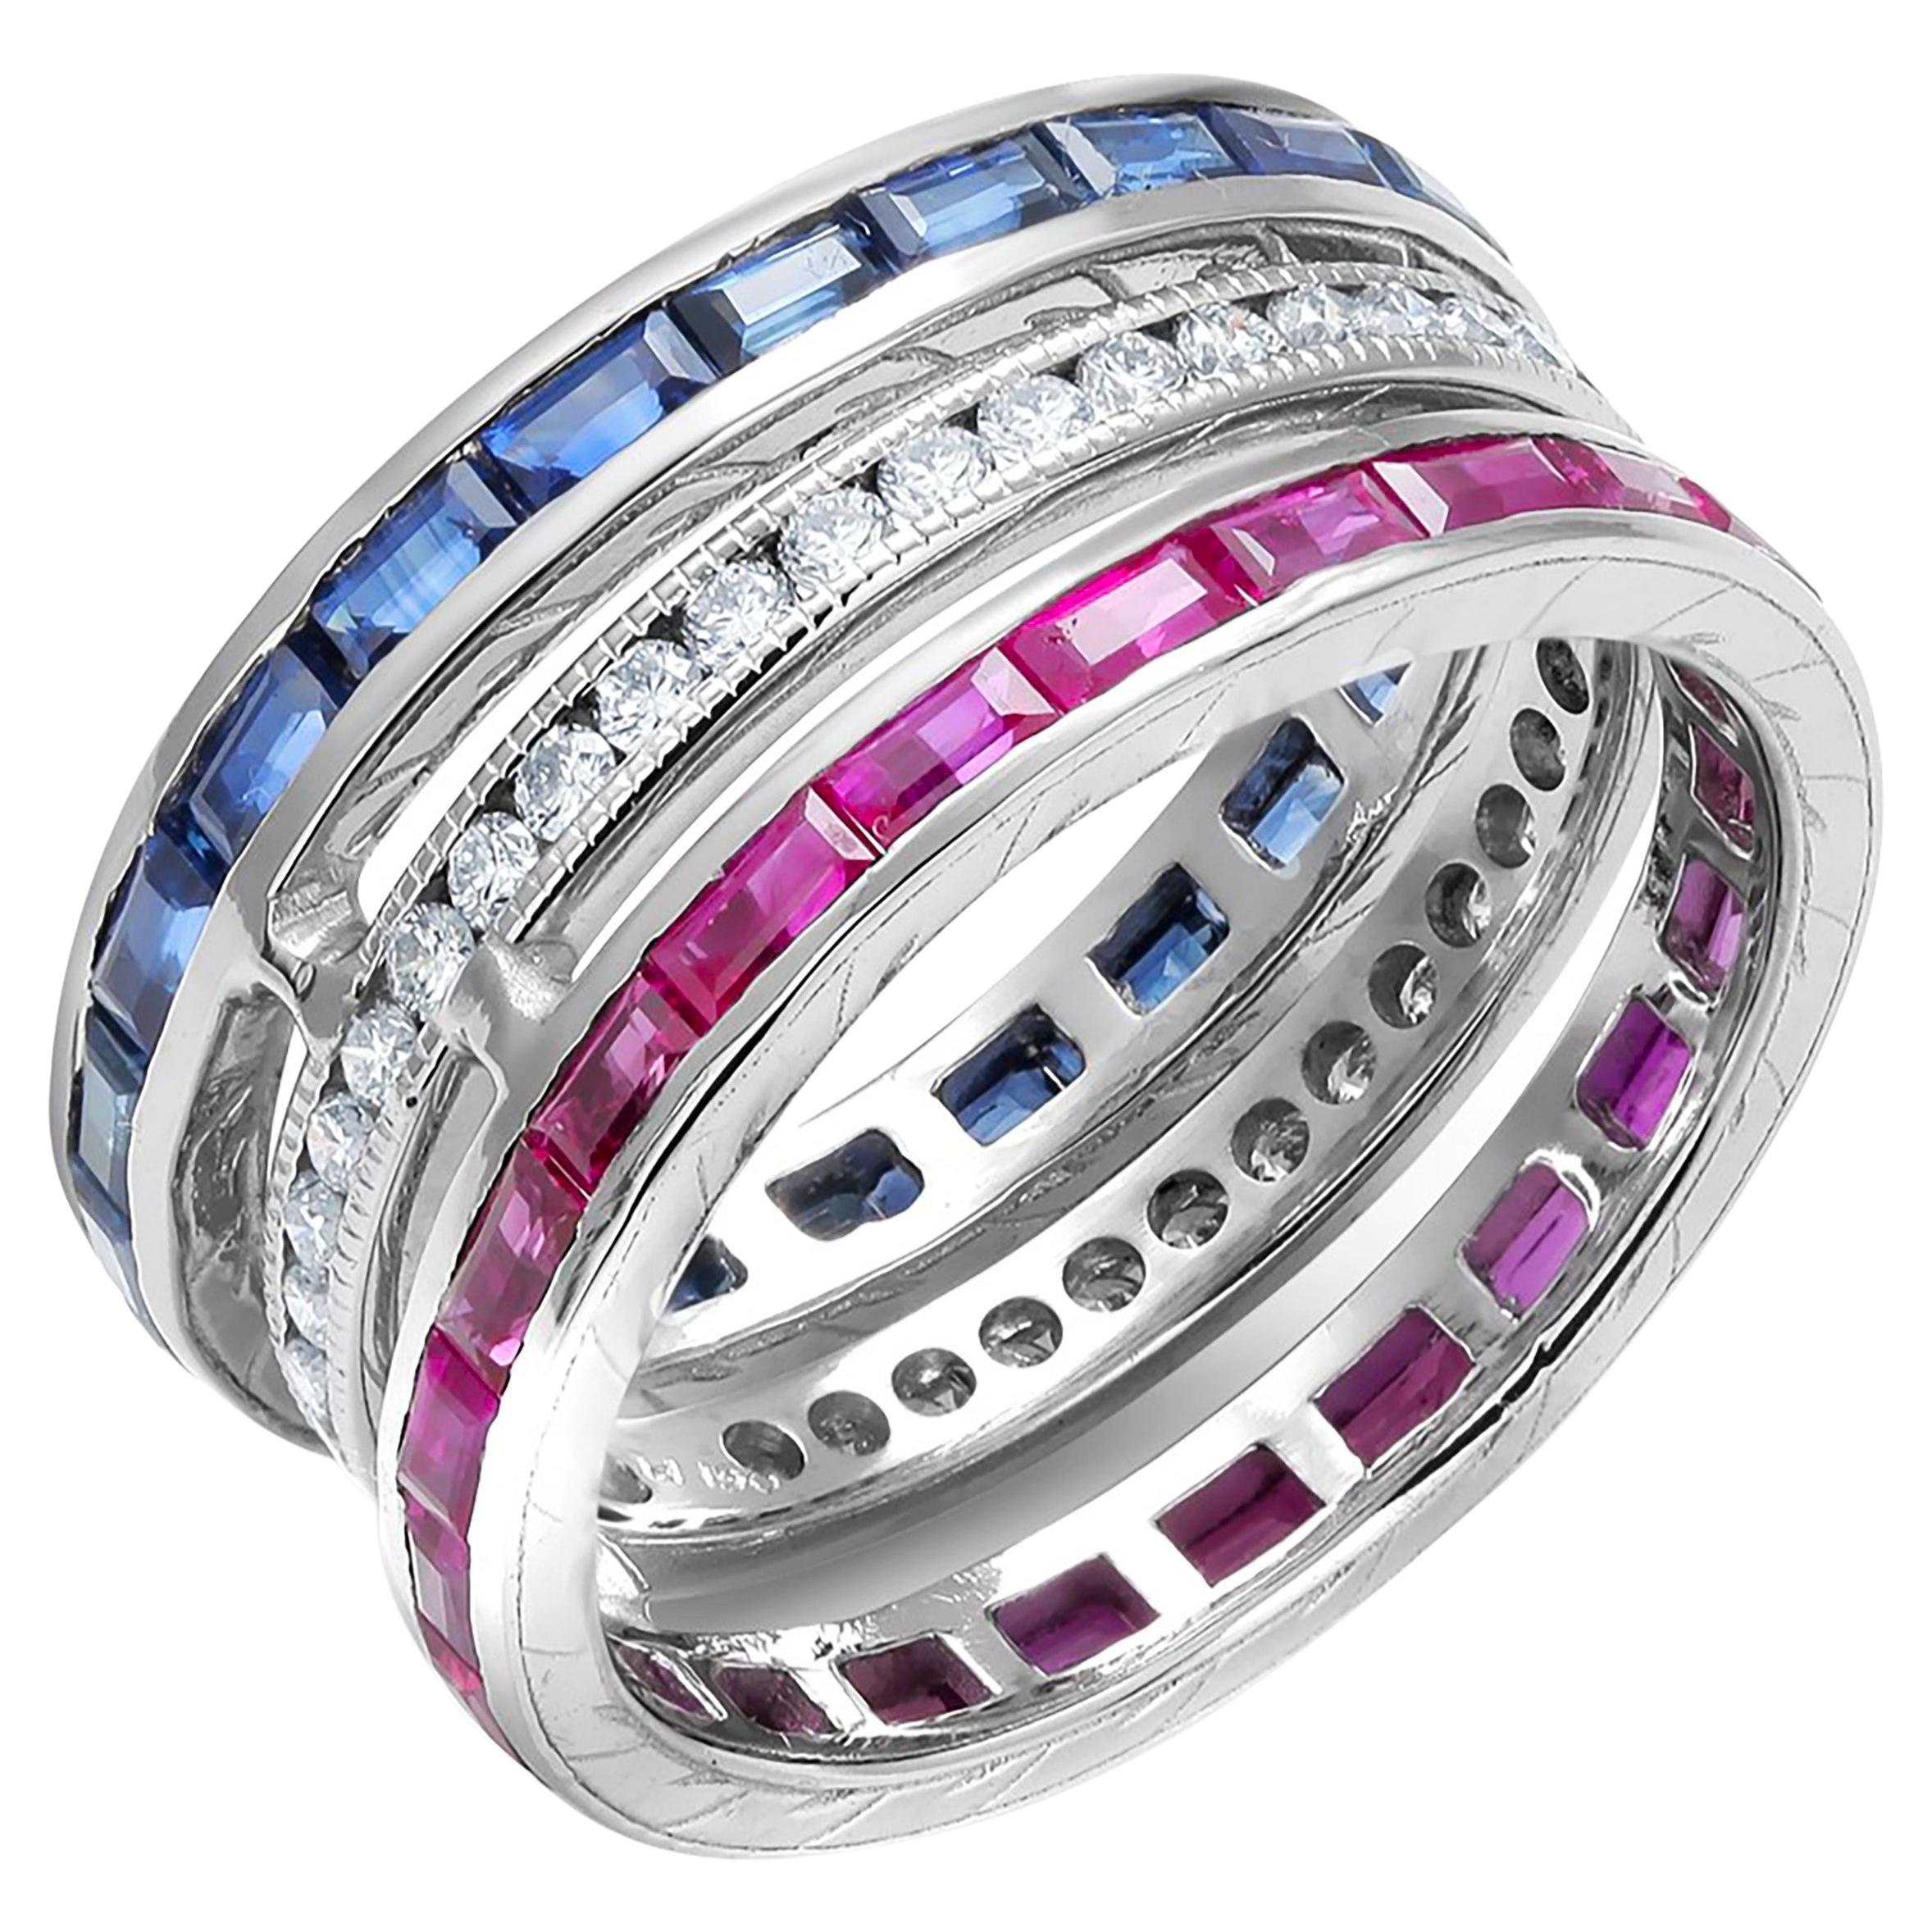 Triple Stacking Bands Ruby Diamond Sapphire 3.80 Carat 9.4 Millimeter Wide Ring